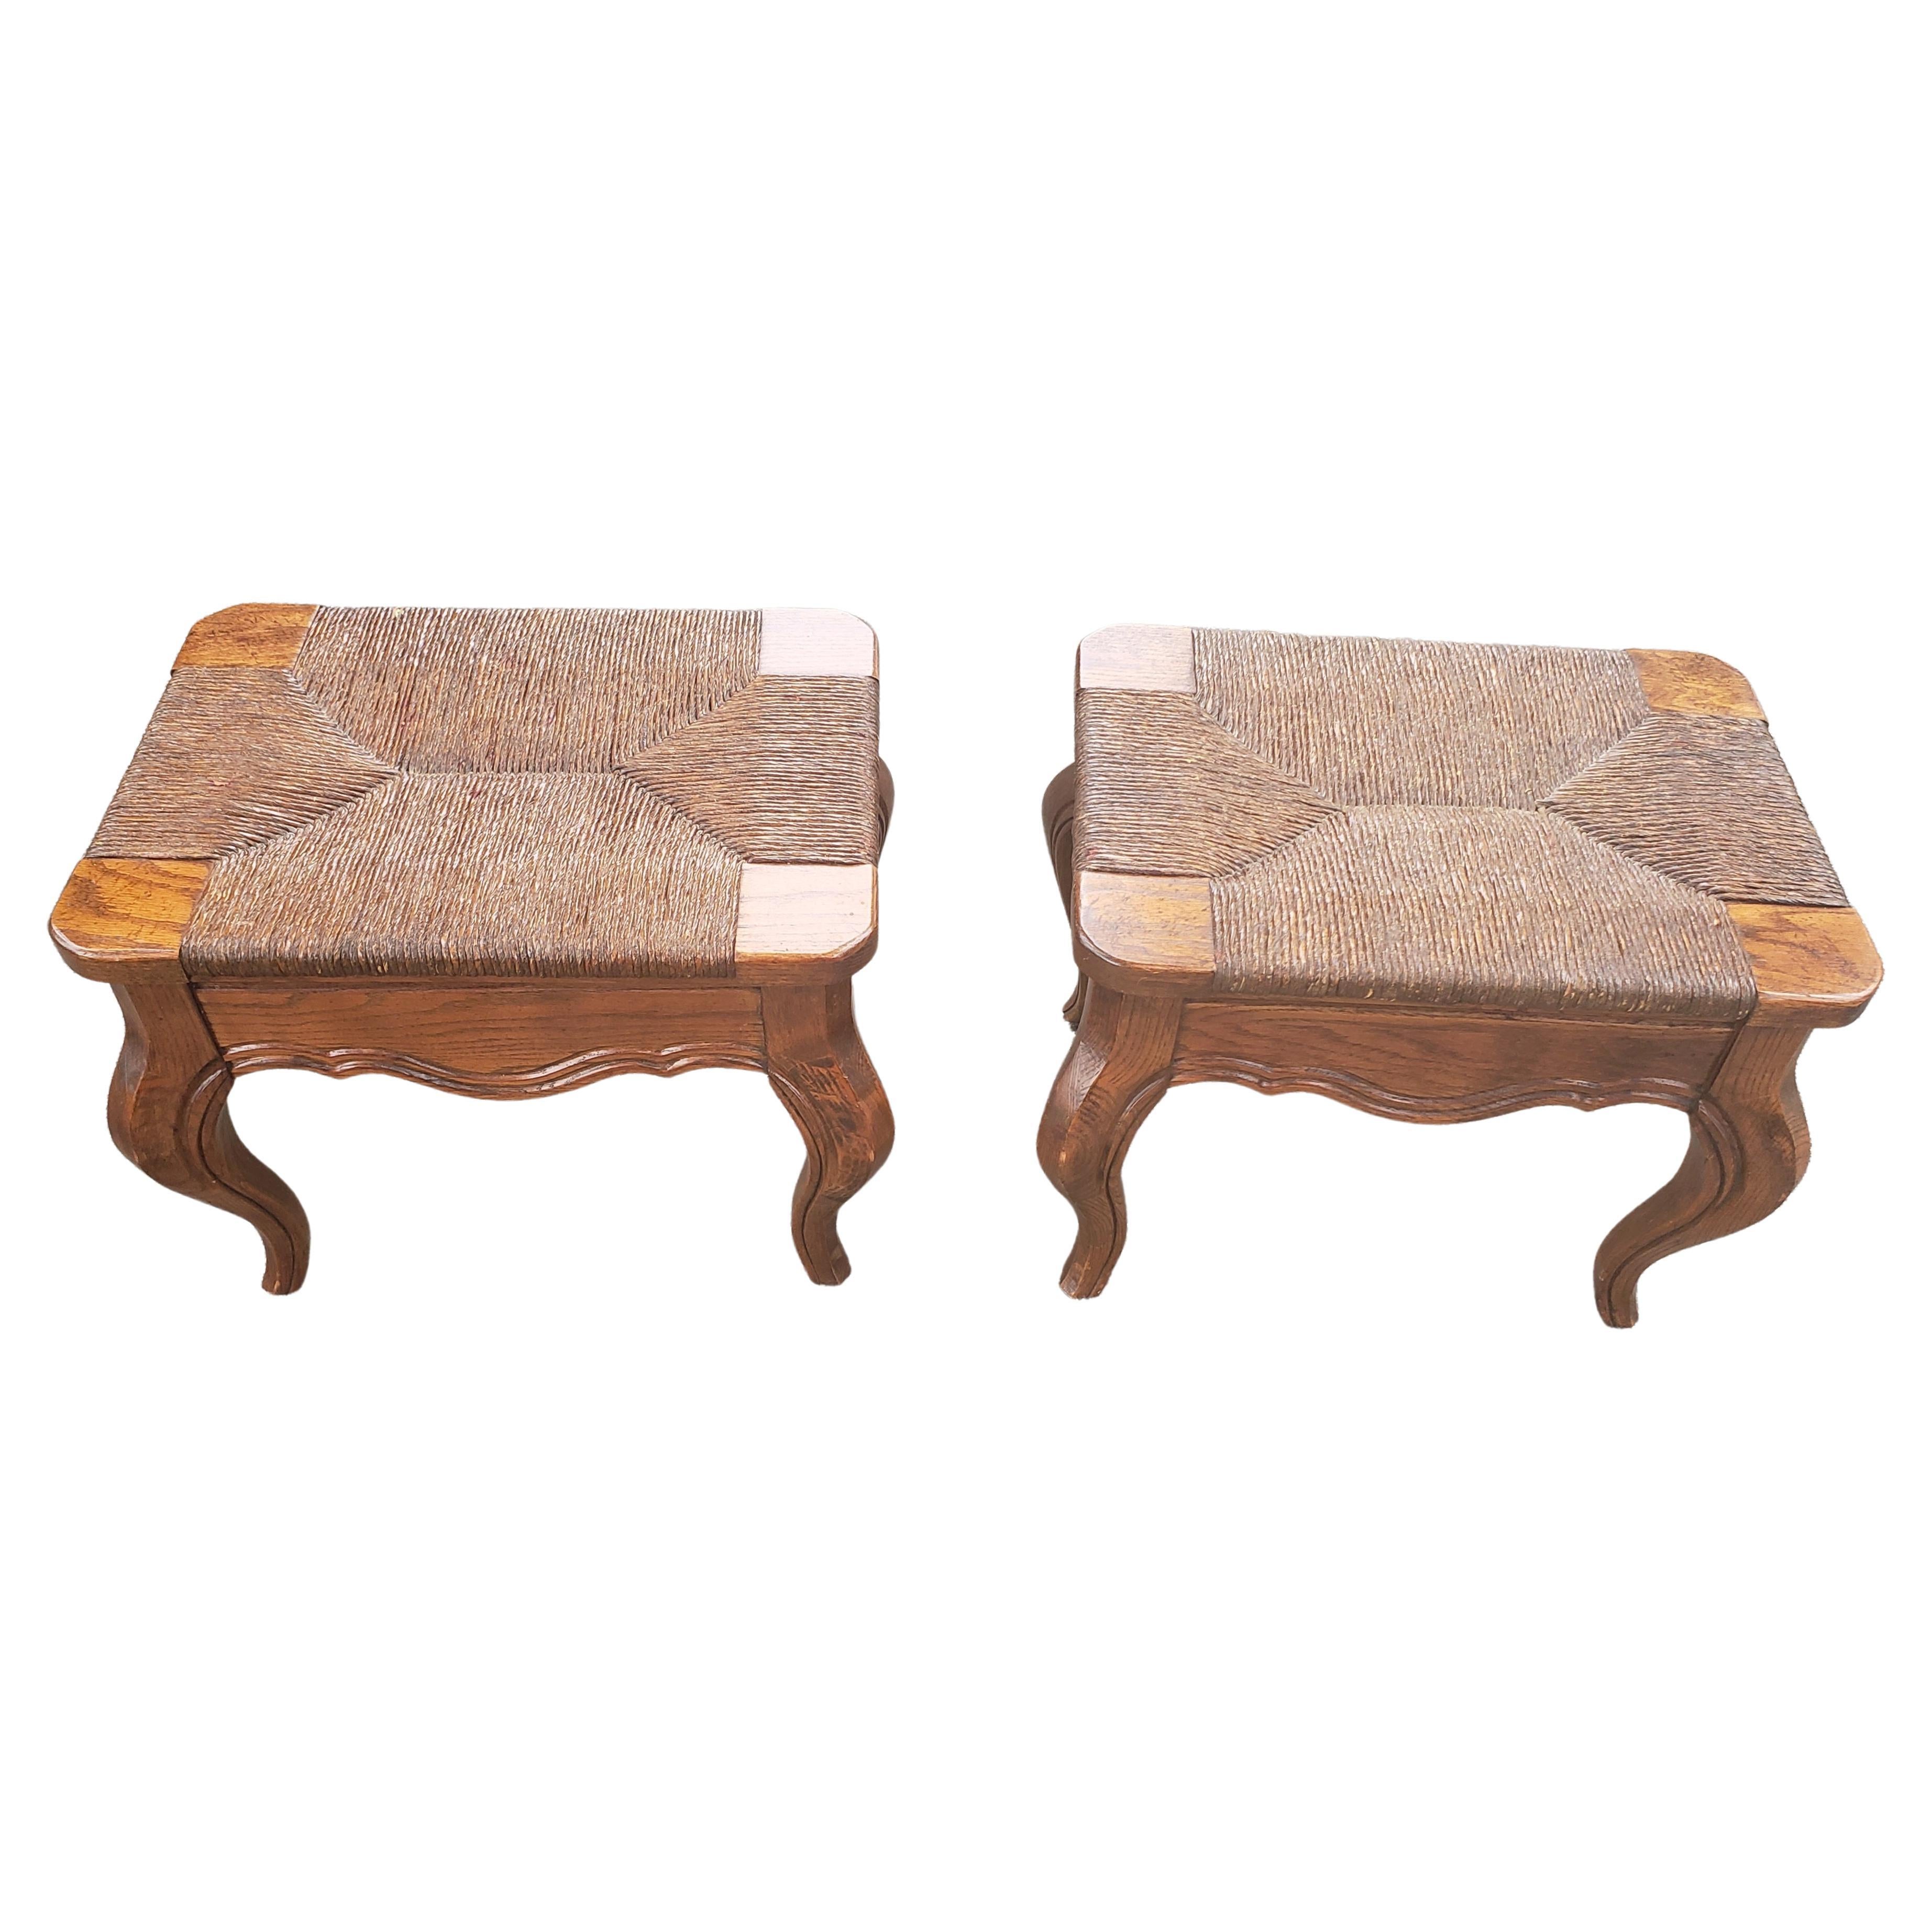 French Provincial Hammary French Country Oak Rush Seat Footstools, Ottoman, a Pair